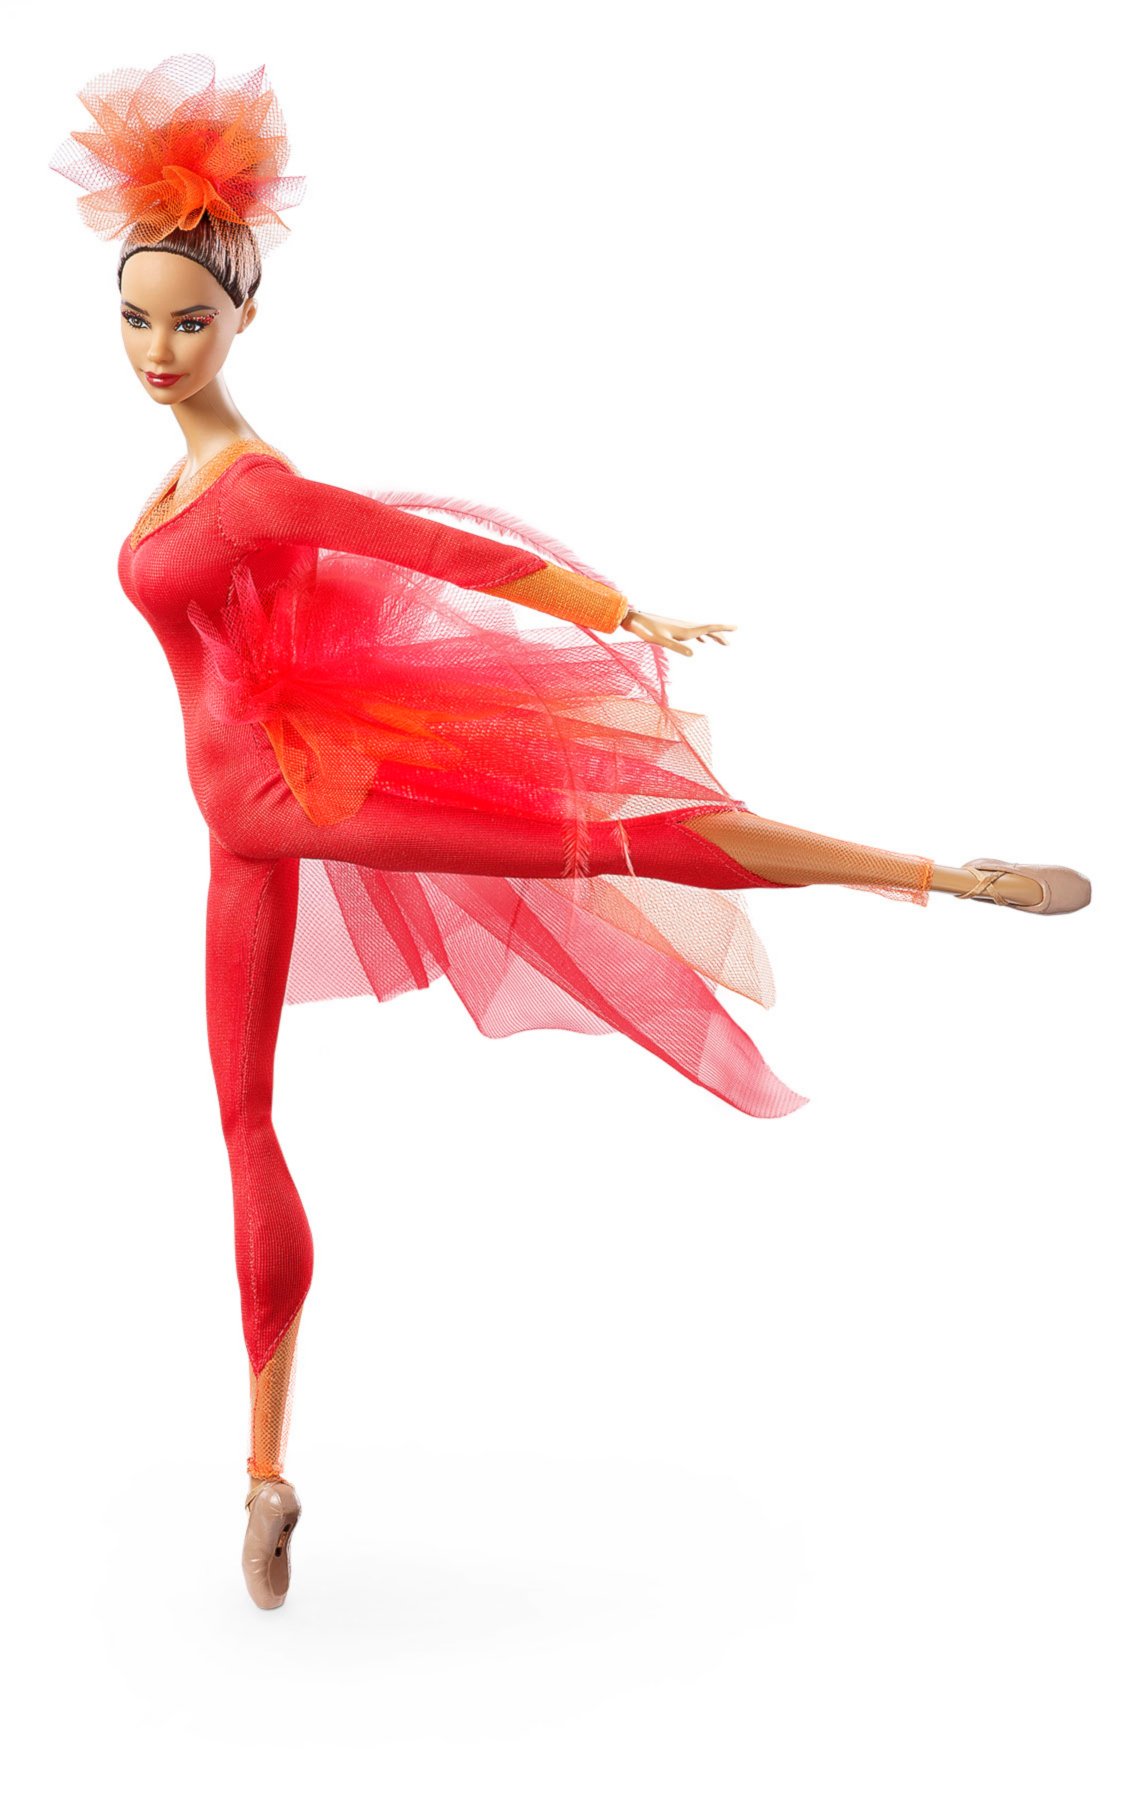 Ballerina Misty Copeland to 'Inspire the Next Generation' With Her Own  Barbie Doll - ABC News